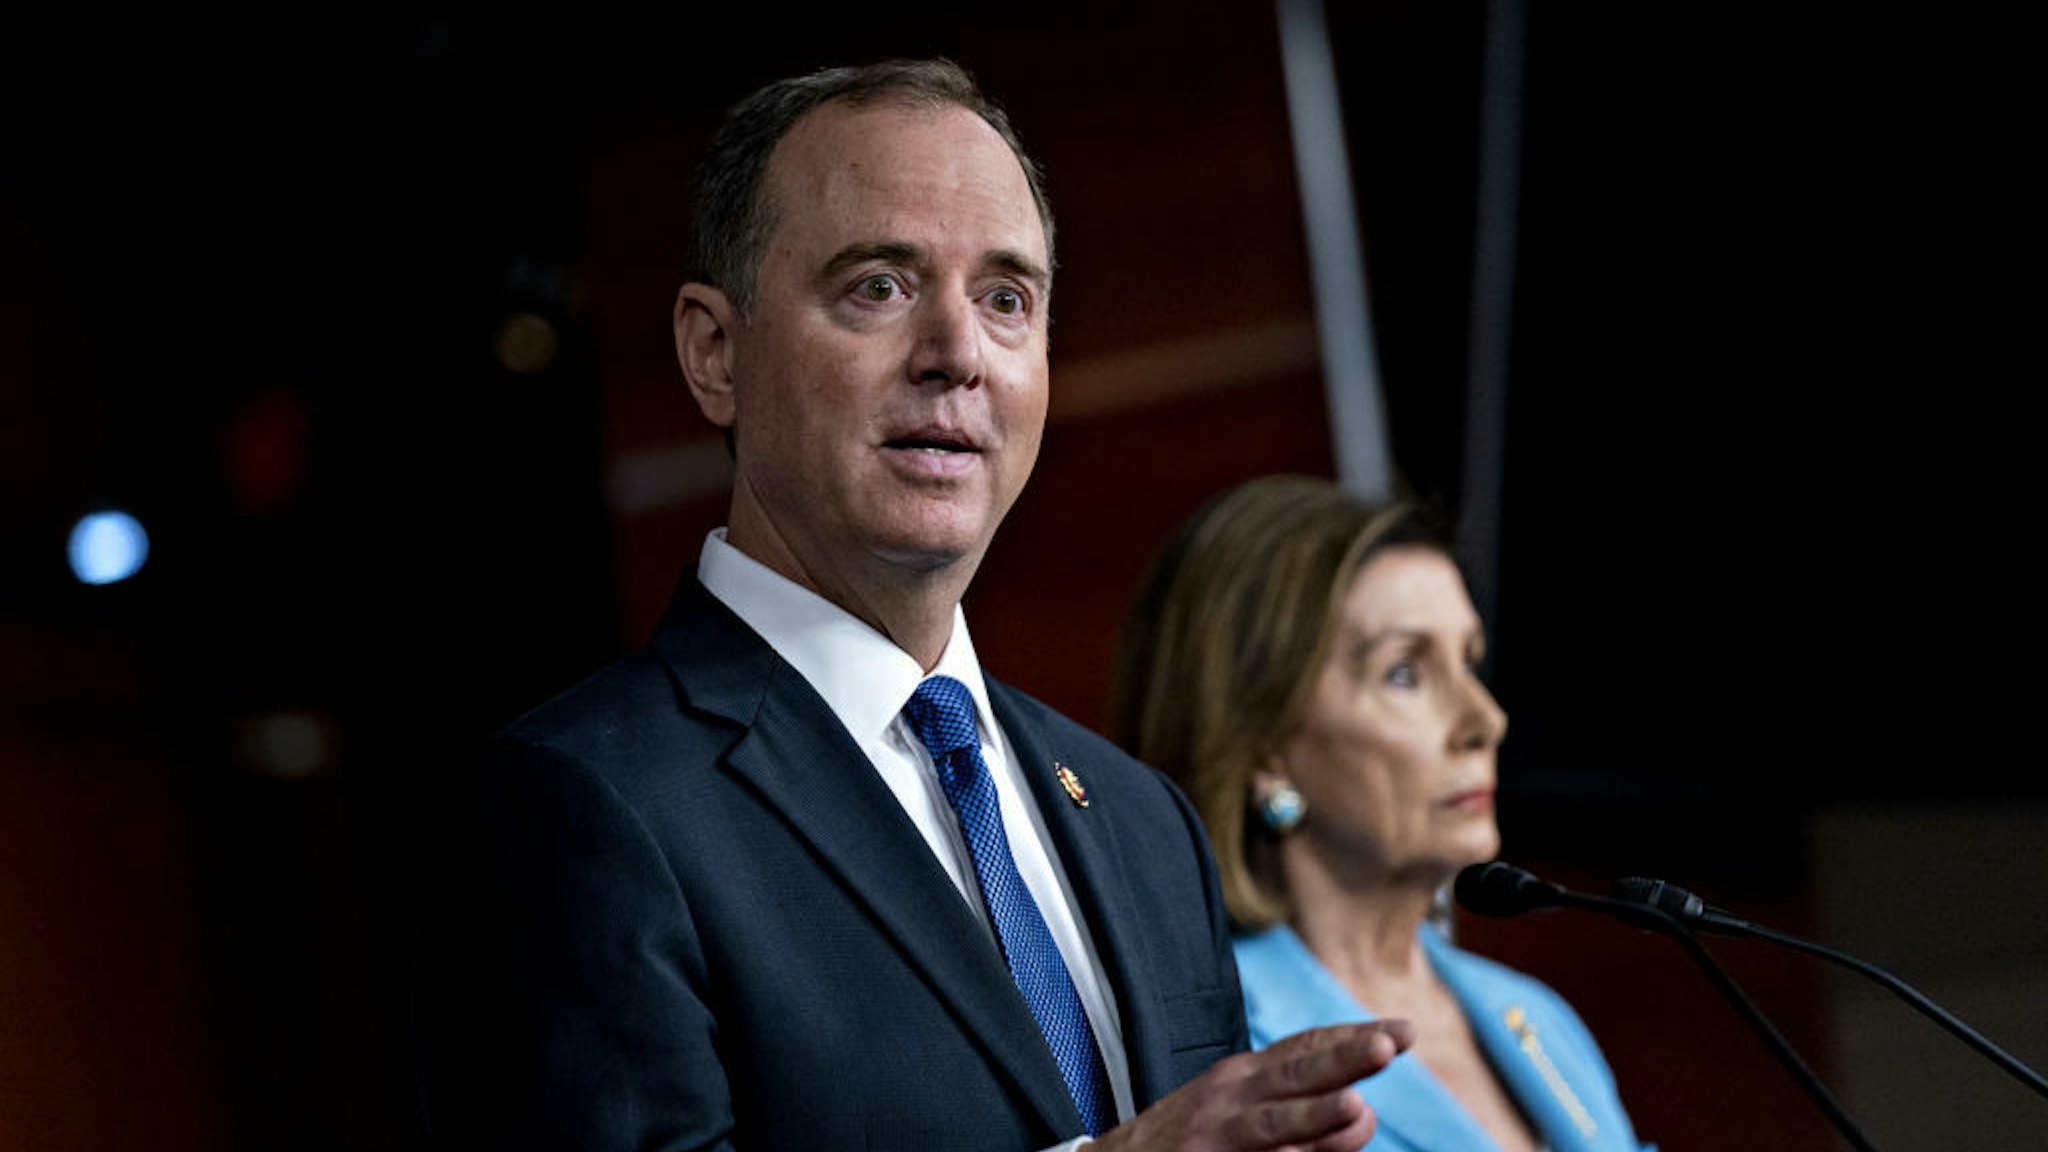 Representative Adam Schiff, a Democrat from California and chairman of the House Intelligence Committee, speaks as U.S. House Speaker Nancy Pelosi, a Democrat from California, right, listens during a news conference on Capitol Hill in Washington, D.C., U.S., on Wednesday, Oct. 2, 2019. Three House committee chairmen threatened on Wednesday to subpoena the White House if it fails to adhere by Friday to document requests related to allegations that President Donald Trump pressured Ukraine into investigating one of his leading political rivals. Photographer: Andrew Harrer/Bloomberg